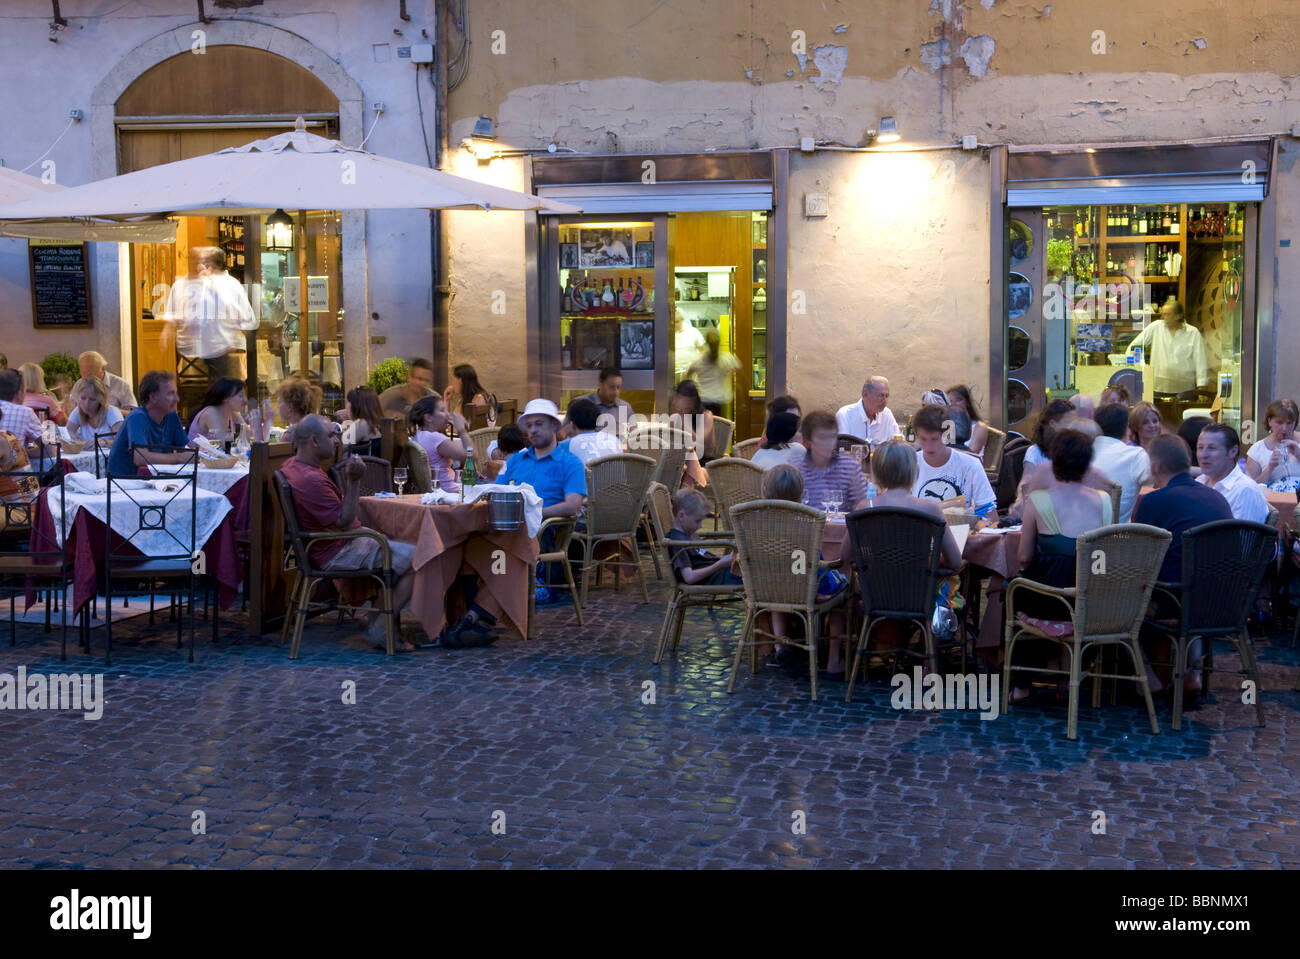 Geographie/Reisen, Italien, Rom, Piazza della Rotonda, Restaurant, Cafe, Additional-Rights - Clearance-Info - Not-Available Stockfoto